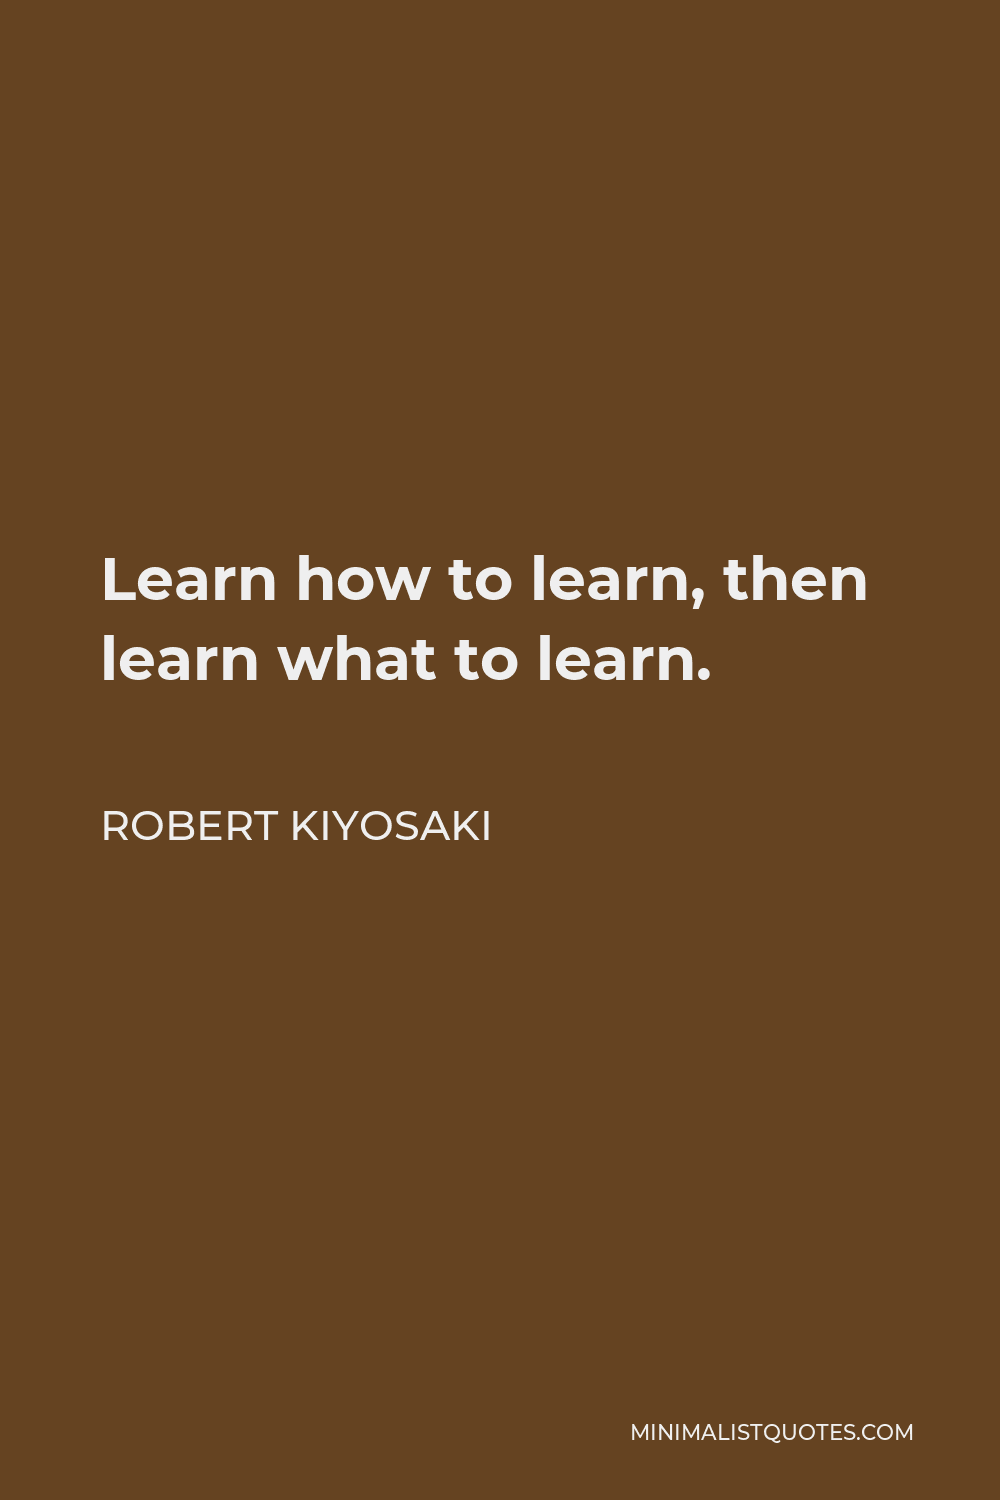 Robert Kiyosaki Quote - Learn how to learn, then learn what to learn.